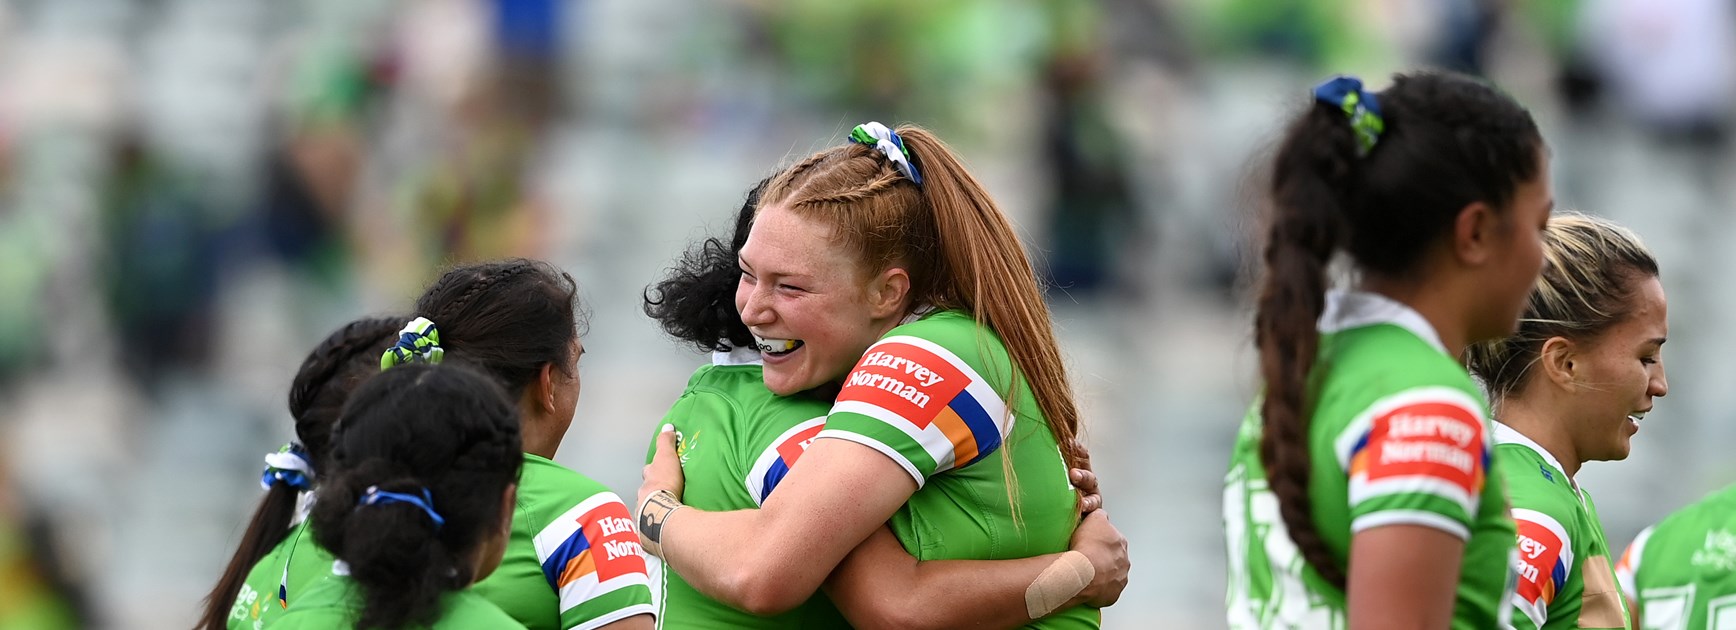 Raiders score first NRLW win over Roosters